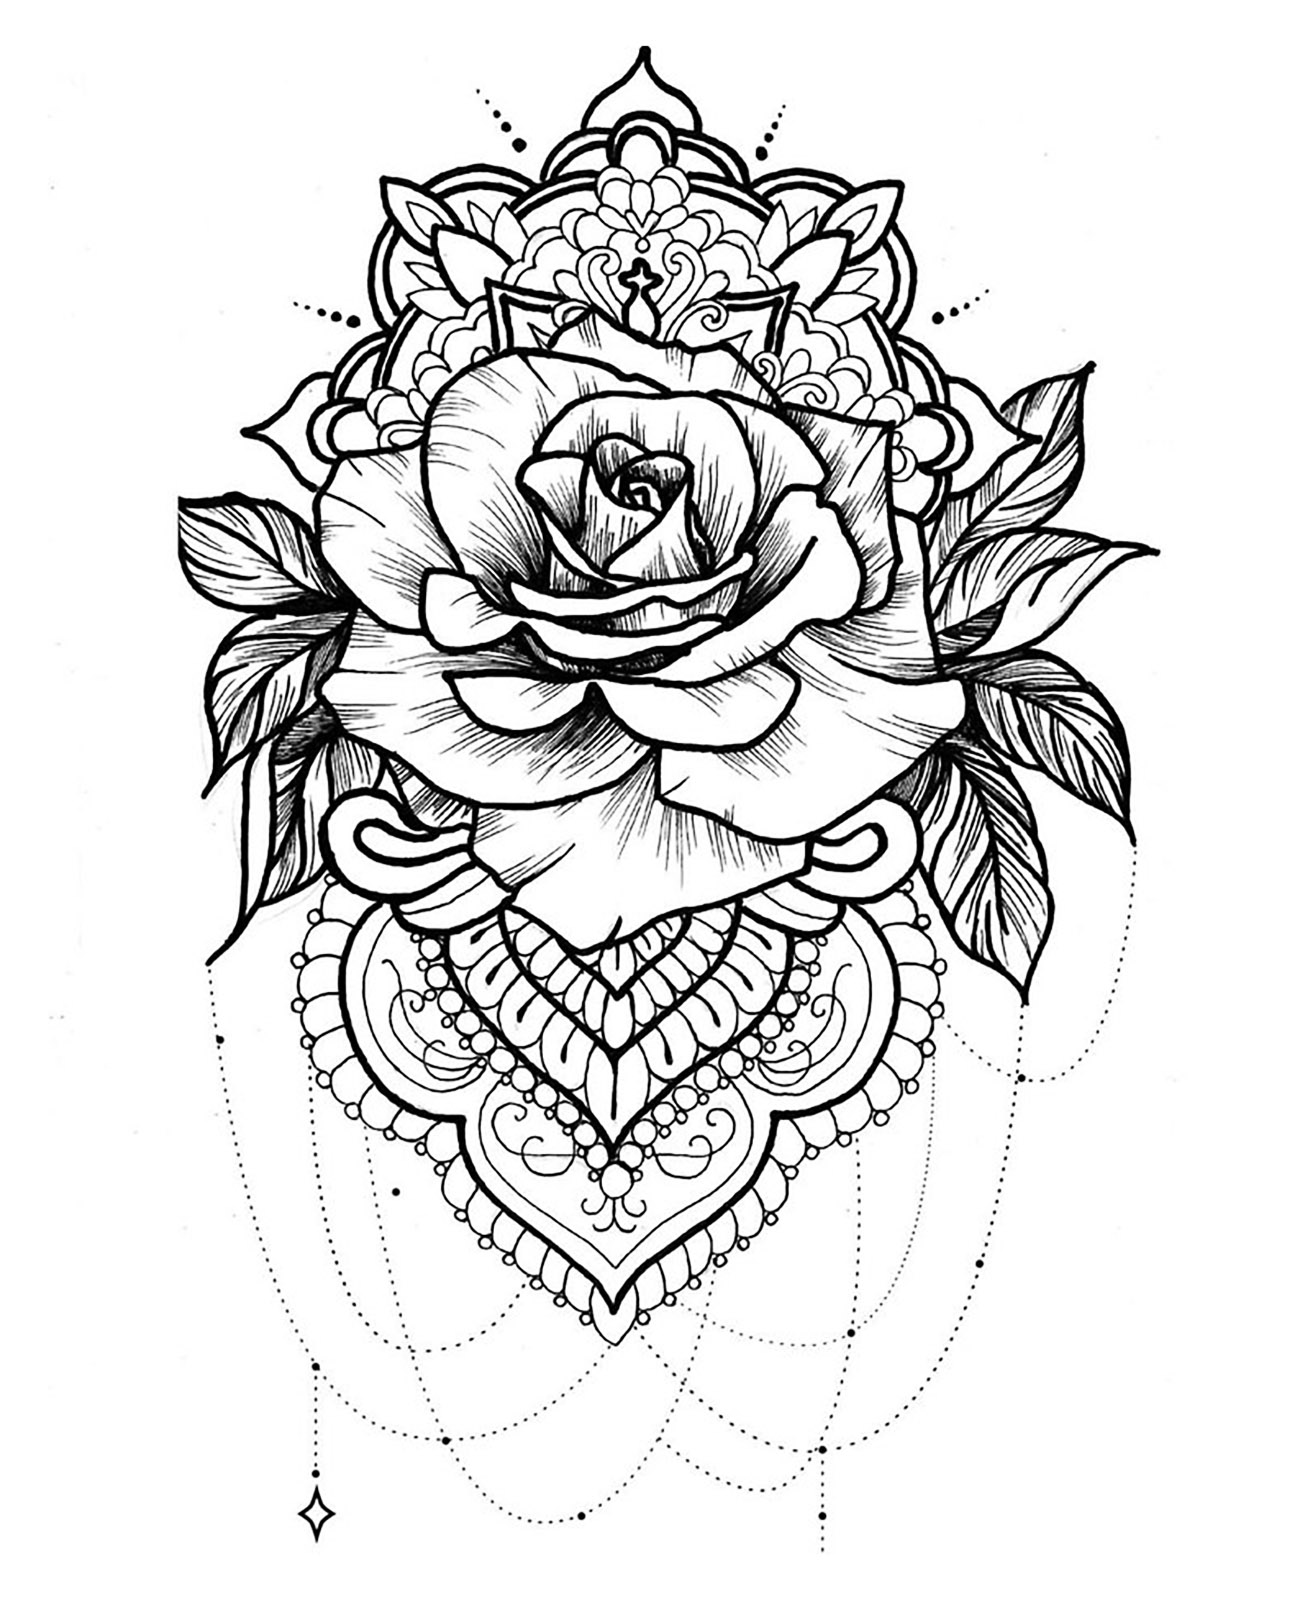 A Mandala with a magnificent rose, leaves, jewels and elegant patterns